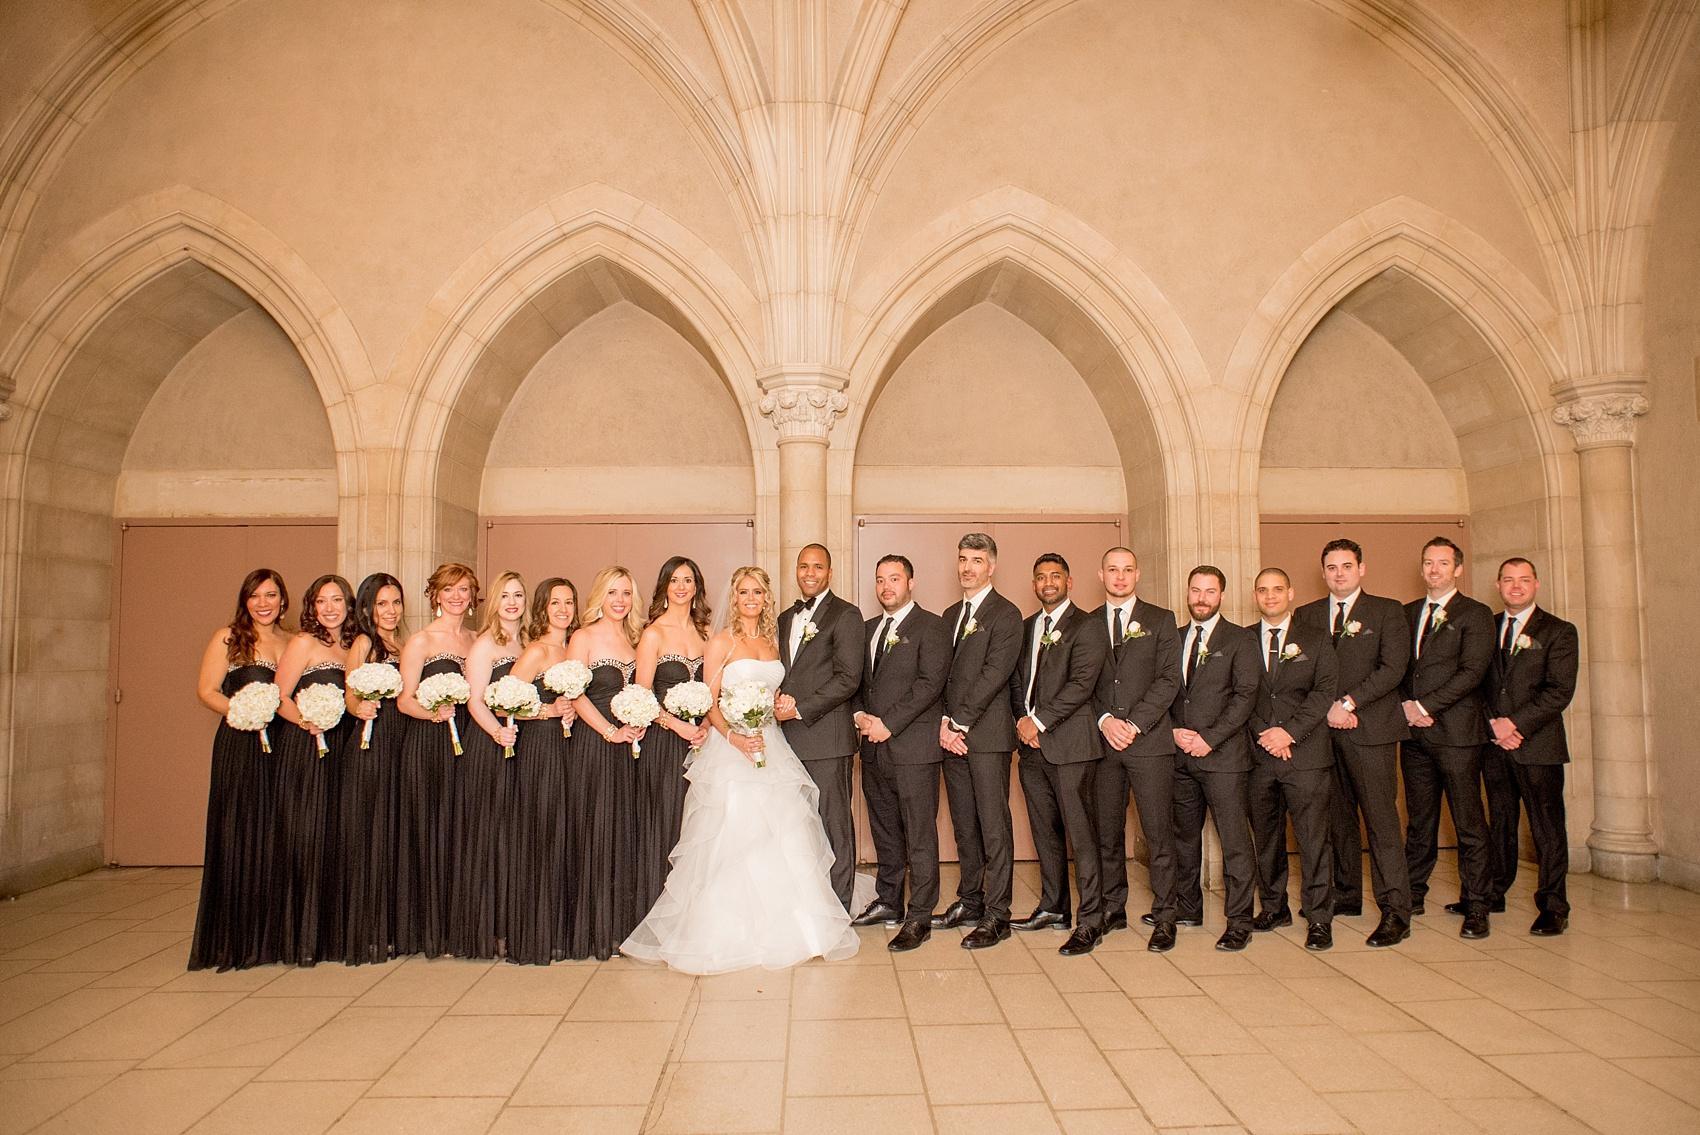 Bridal party in black and white at Riverside Church in New York City. Image by Mikkel Paige Photography.